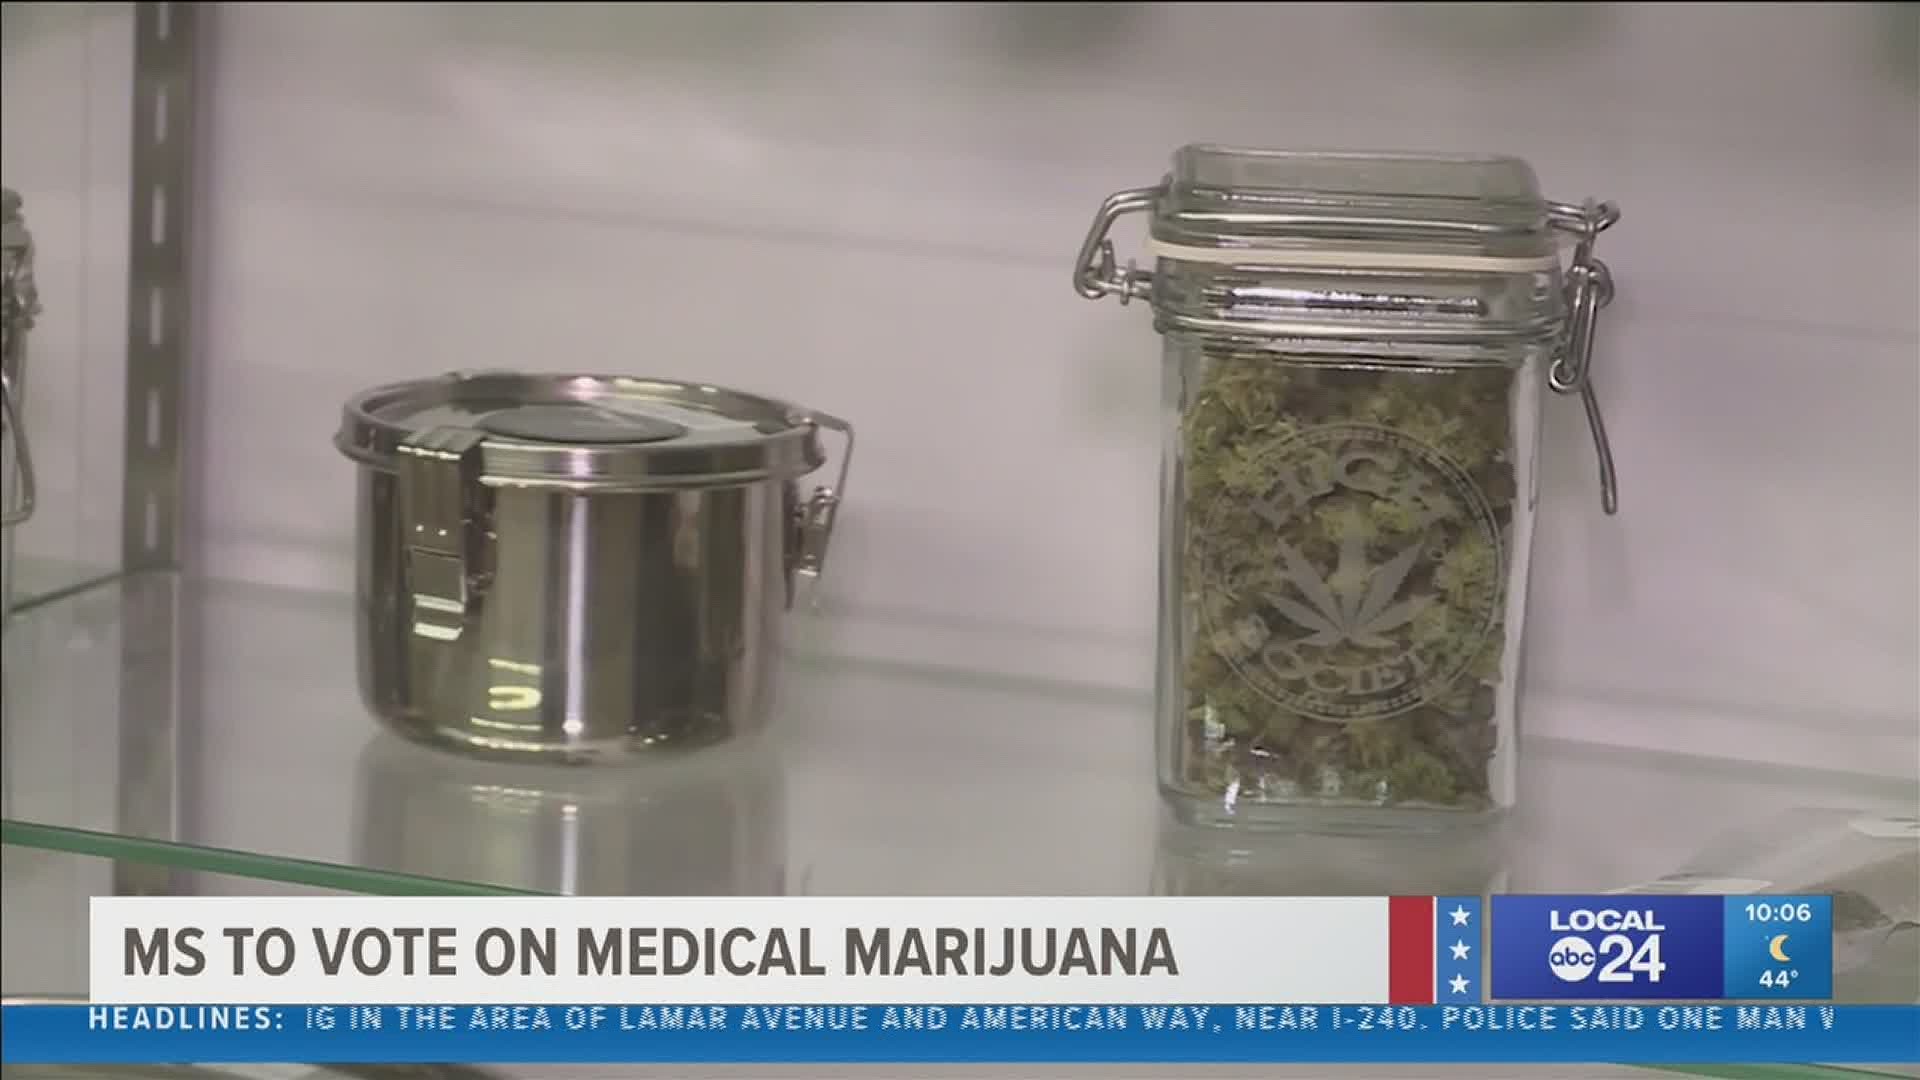 While voting for the next president, citizens of Mississippi will be deciding if medical marijuana is legalized in the state.